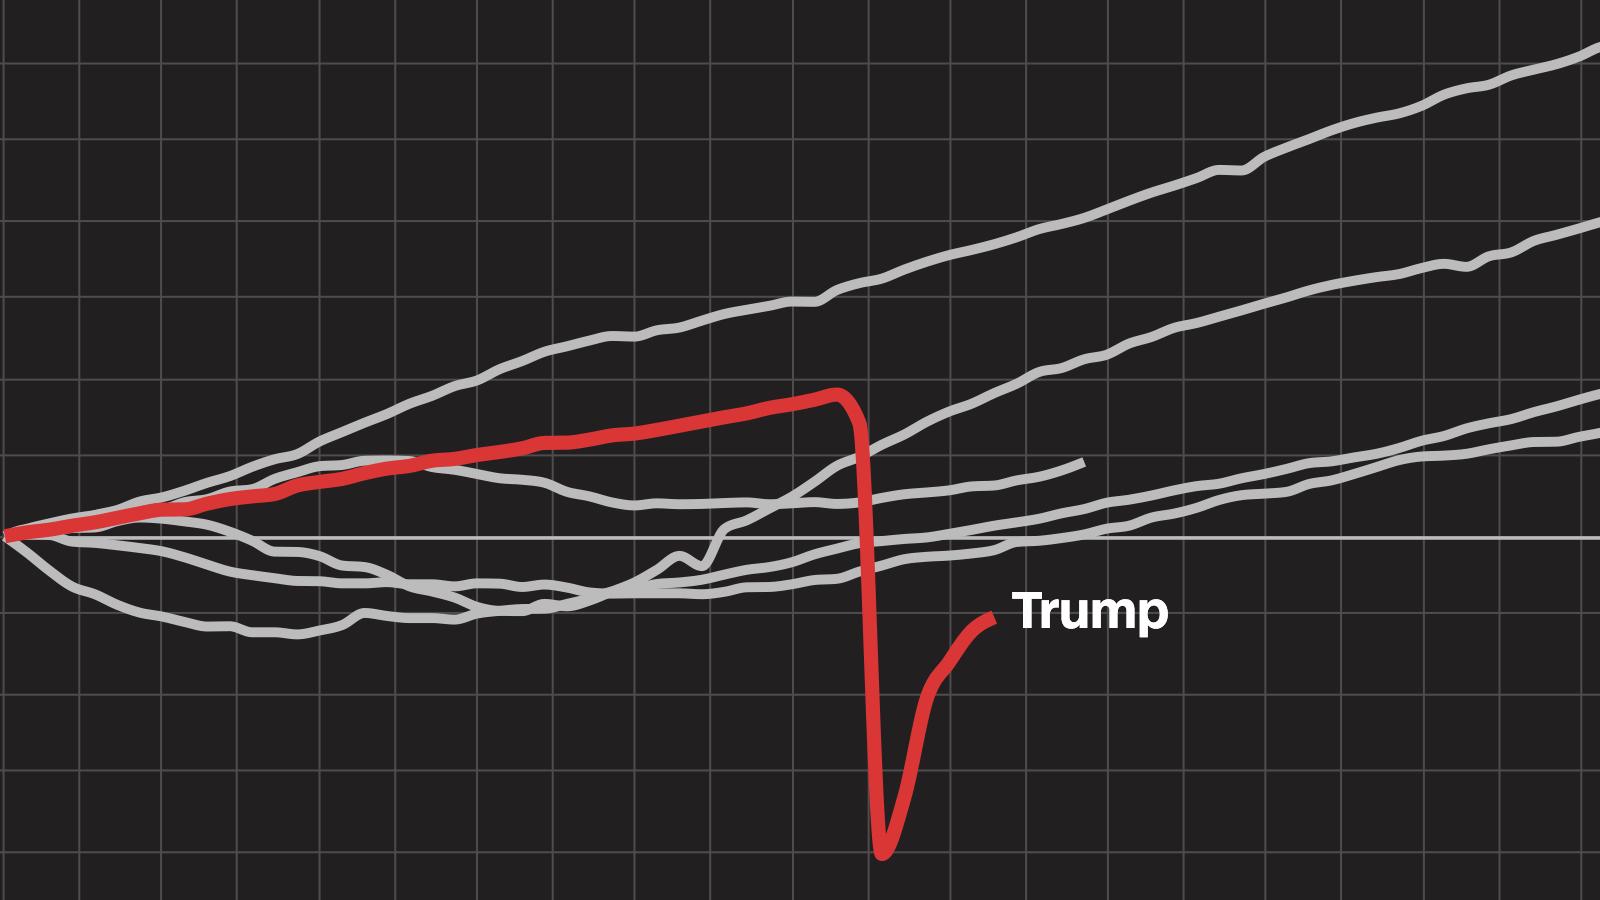 How the Trump economy compares to the economies under other presidents